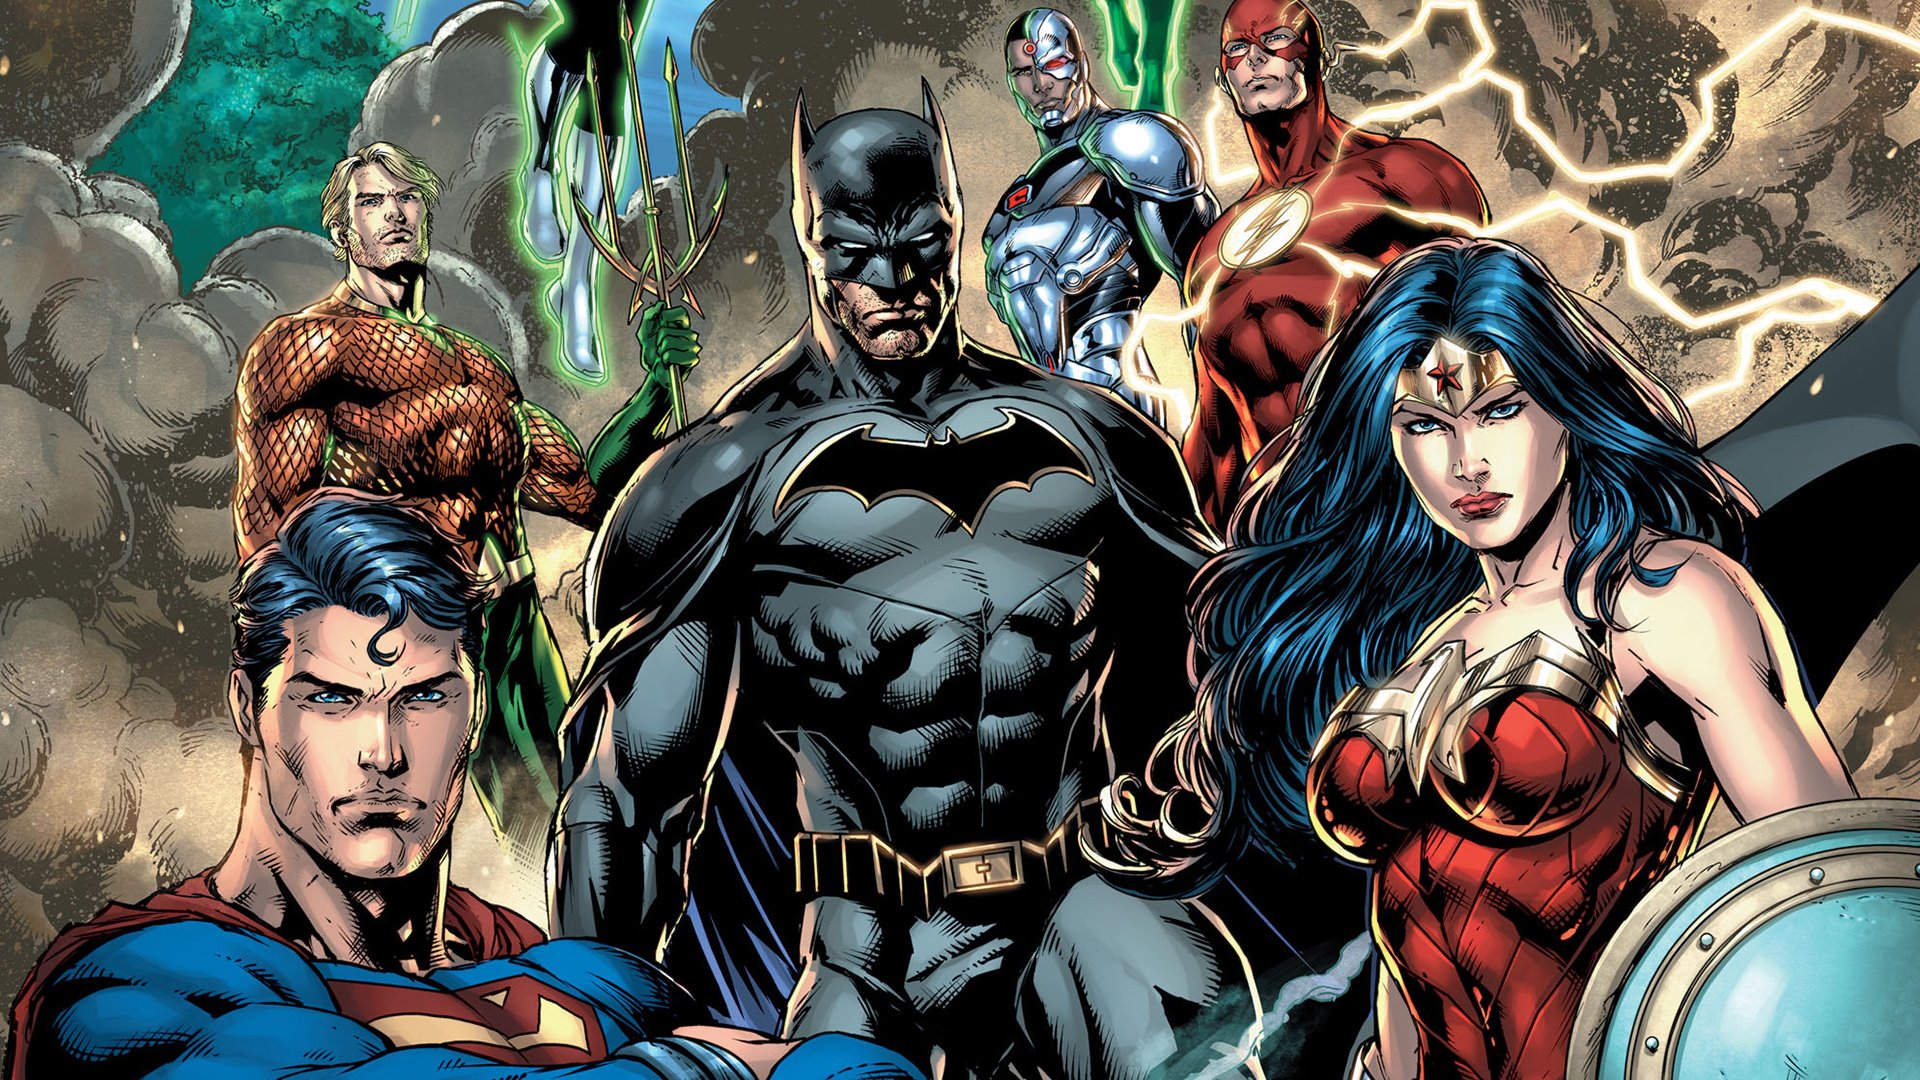 The Justice League in Comics